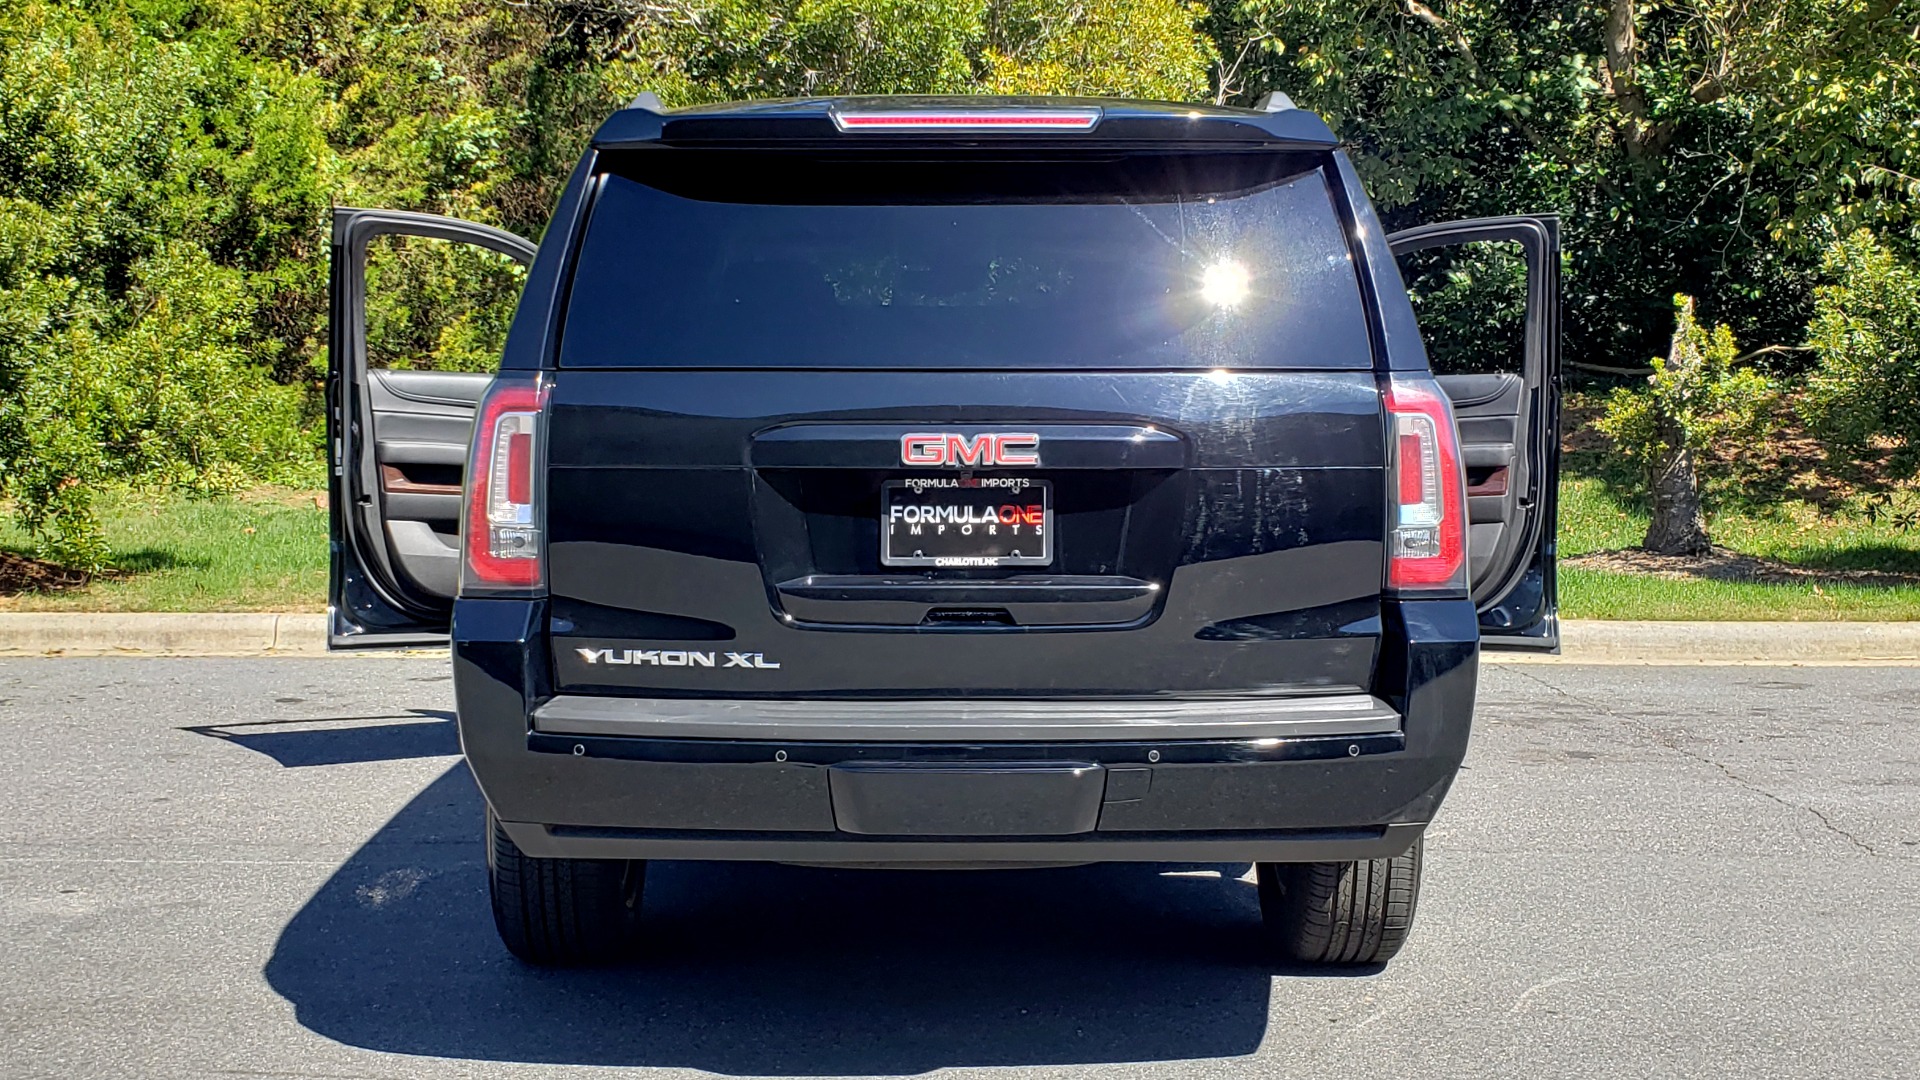 Used 2016 GMC YUKON XL SLT / NAV / BOSE / 3-ROWS - SEATS 8 / REARVIEW for sale Sold at Formula Imports in Charlotte NC 28227 31